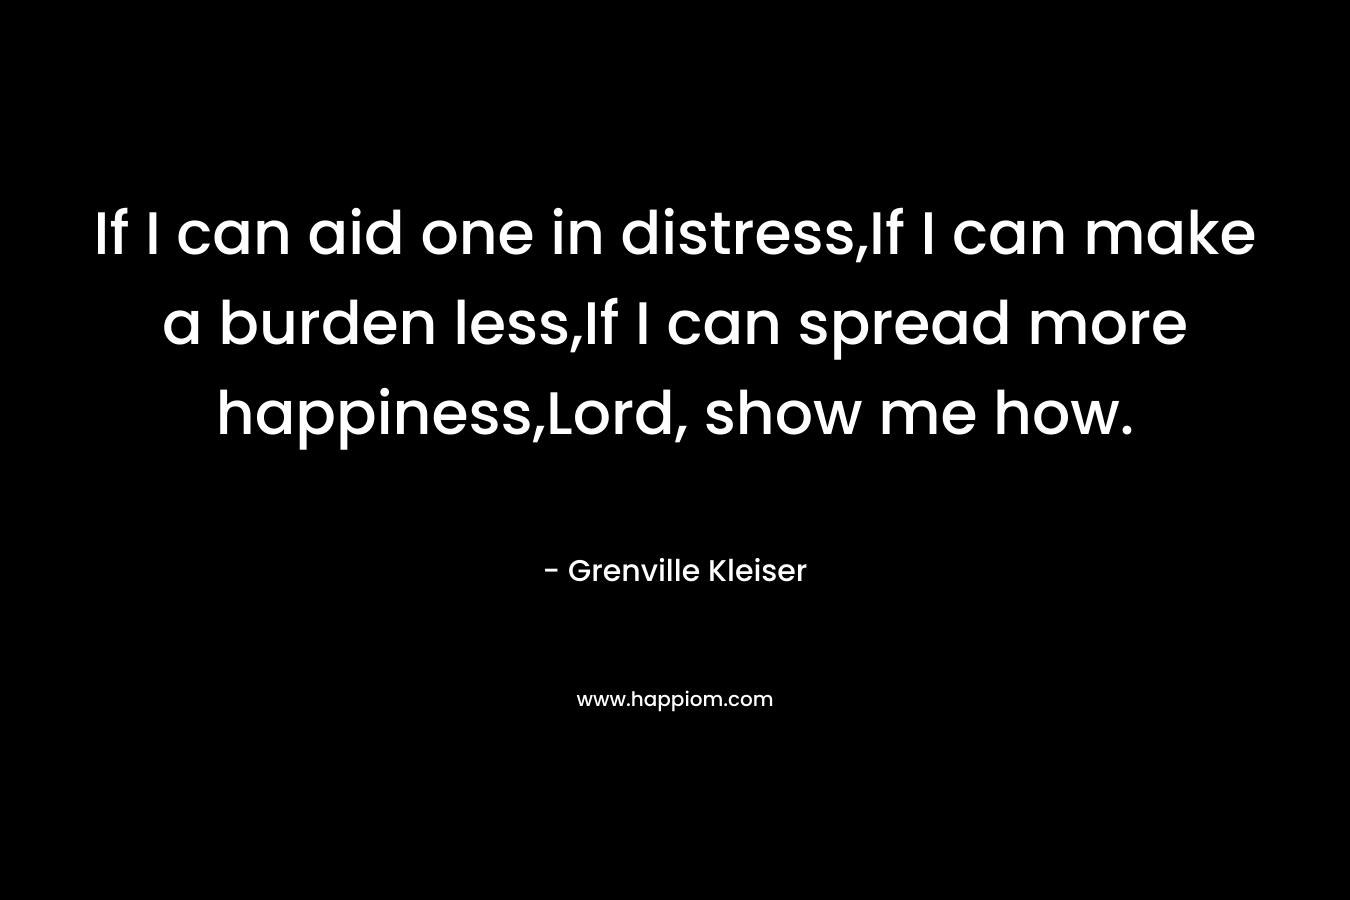 If I can aid one in distress,If I can make a burden less,If I can spread more happiness,Lord, show me how. – Grenville Kleiser